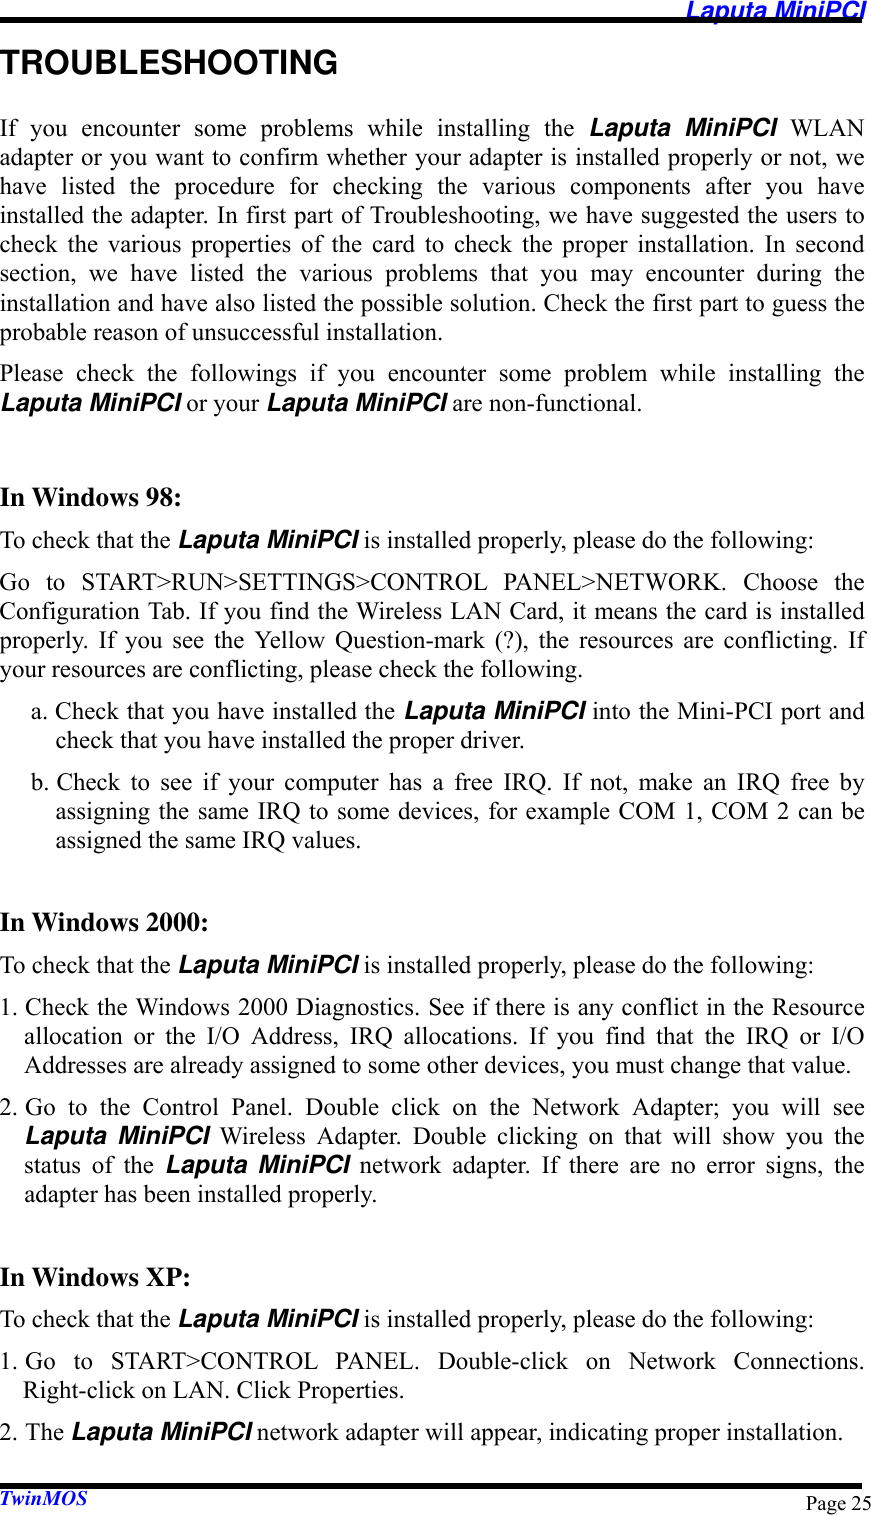   Laputa MiniPCI TwinMOS  Page 25TROUBLESHOOTING If you encounter some problems while installing the Laputa MiniPCI WLAN adapter or you want to confirm whether your adapter is installed properly or not, we have listed the procedure for checking the various components after you have installed the adapter. In first part of Troubleshooting, we have suggested the users to check the various properties of the card to check the proper installation. In second section, we have listed the various problems that you may encounter during the installation and have also listed the possible solution. Check the first part to guess the probable reason of unsuccessful installation. Please check the followings if you encounter some problem while installing the Laputa MiniPCI or your Laputa MiniPCI are non-functional.  In Windows 98: To check that the Laputa MiniPCI is installed properly, please do the following: Go to START&gt;RUN&gt;SETTINGS&gt;CONTROL PANEL&gt;NETWORK. Choose the Configuration Tab. If you find the Wireless LAN Card, it means the card is installed properly. If you see the Yellow Question-mark (?), the resources are conflicting. If your resources are conflicting, please check the following. a. Check that you have installed the Laputa MiniPCI into the Mini-PCI port and check that you have installed the proper driver. b. Check to see if your computer has a free IRQ. If not, make an IRQ free by assigning the same IRQ to some devices, for example COM 1, COM 2 can be assigned the same IRQ values.  In Windows 2000: To check that the Laputa MiniPCI is installed properly, please do the following: 1. Check the Windows 2000 Diagnostics. See if there is any conflict in the Resource allocation or the I/O Address, IRQ allocations. If you find that the IRQ or I/O Addresses are already assigned to some other devices, you must change that value. 2. Go to the Control Panel. Double click on the Network Adapter; you will see Laputa MiniPCI Wireless Adapter. Double clicking on that will show you the status of the Laputa MiniPCI network adapter. If there are no error signs, the adapter has been installed properly.  In Windows XP: To check that the Laputa MiniPCI is installed properly, please do the following: 1. Go to START&gt;CONTROL PANEL. Double-click on Network Connections.  Right-click on LAN. Click Properties. 2. The Laputa MiniPCI network adapter will appear, indicating proper installation. 